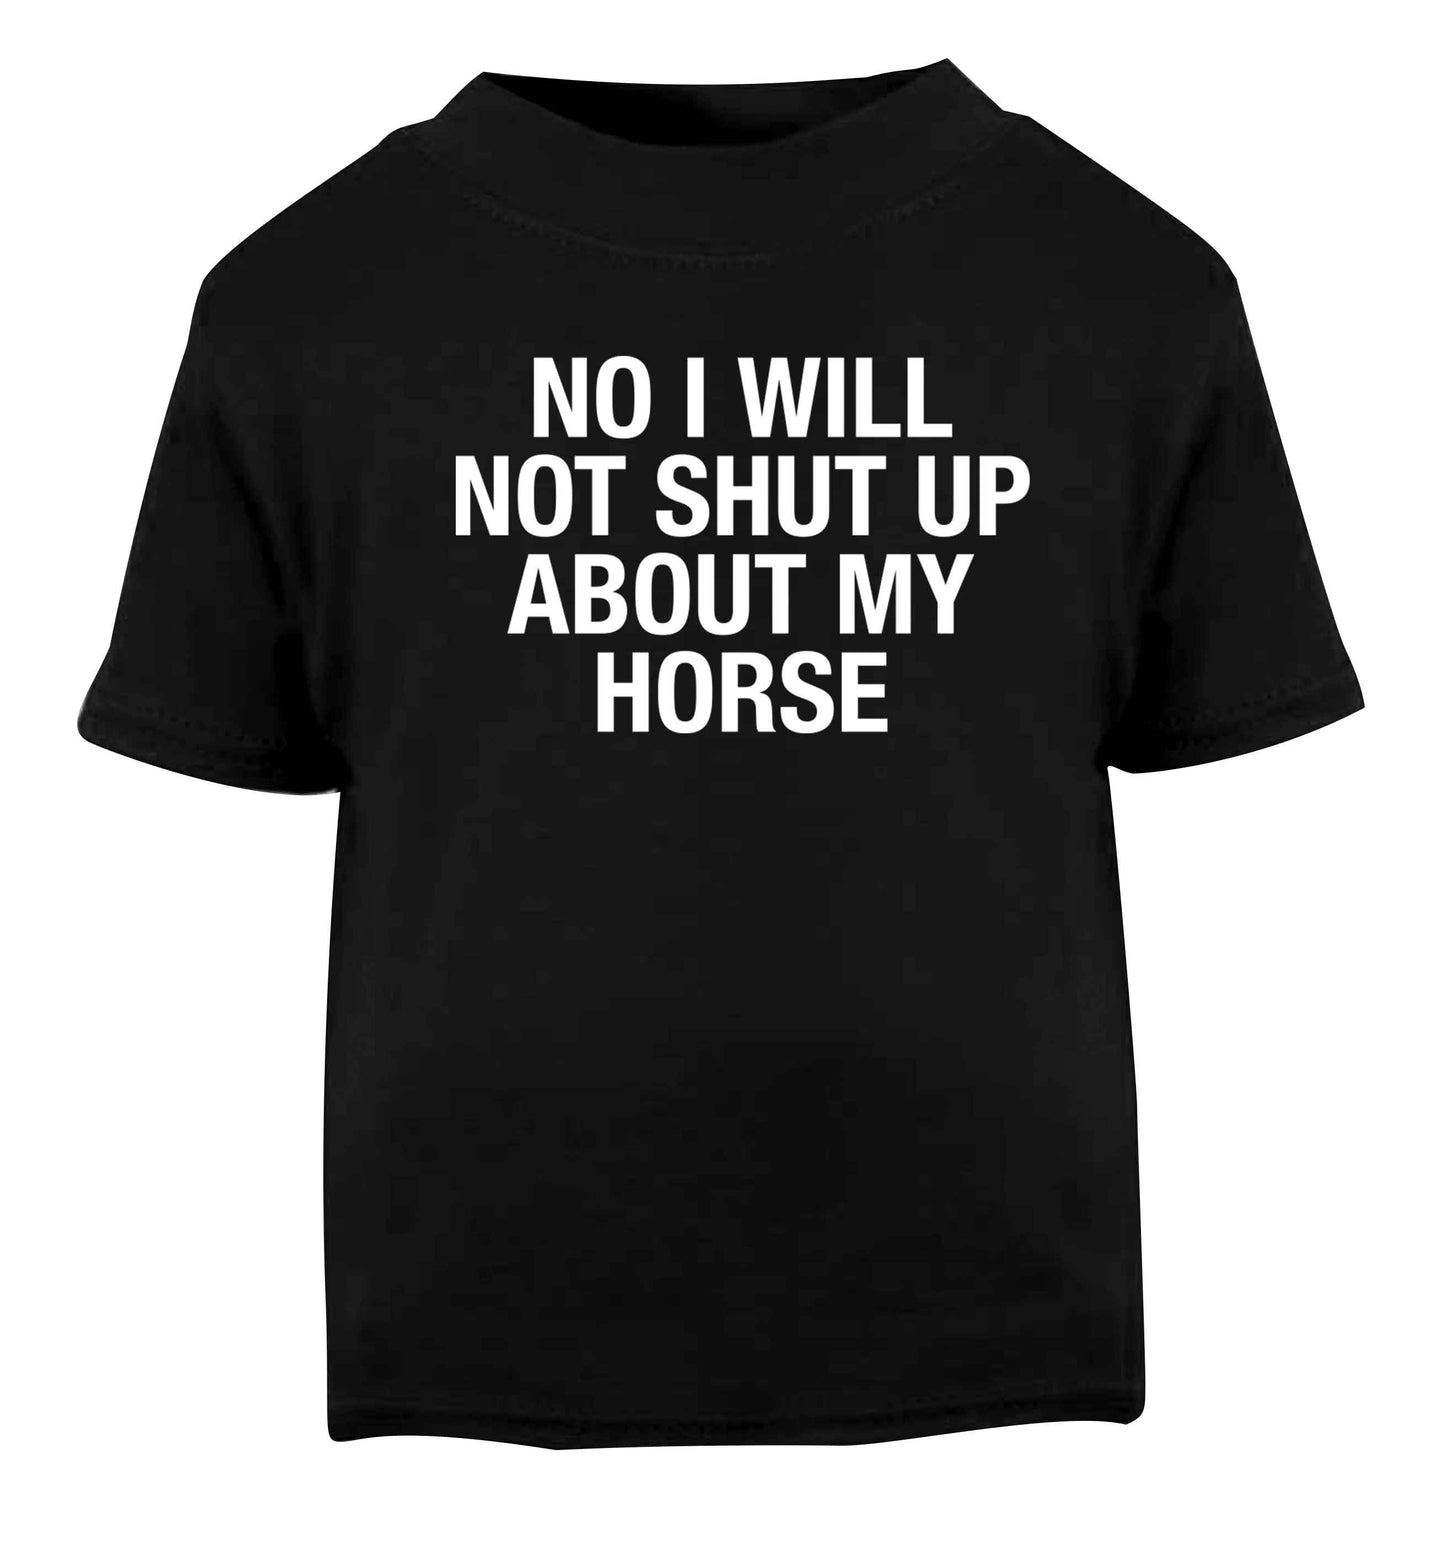 No I will not shut up talking about my horse Black baby toddler Tshirt 2 years